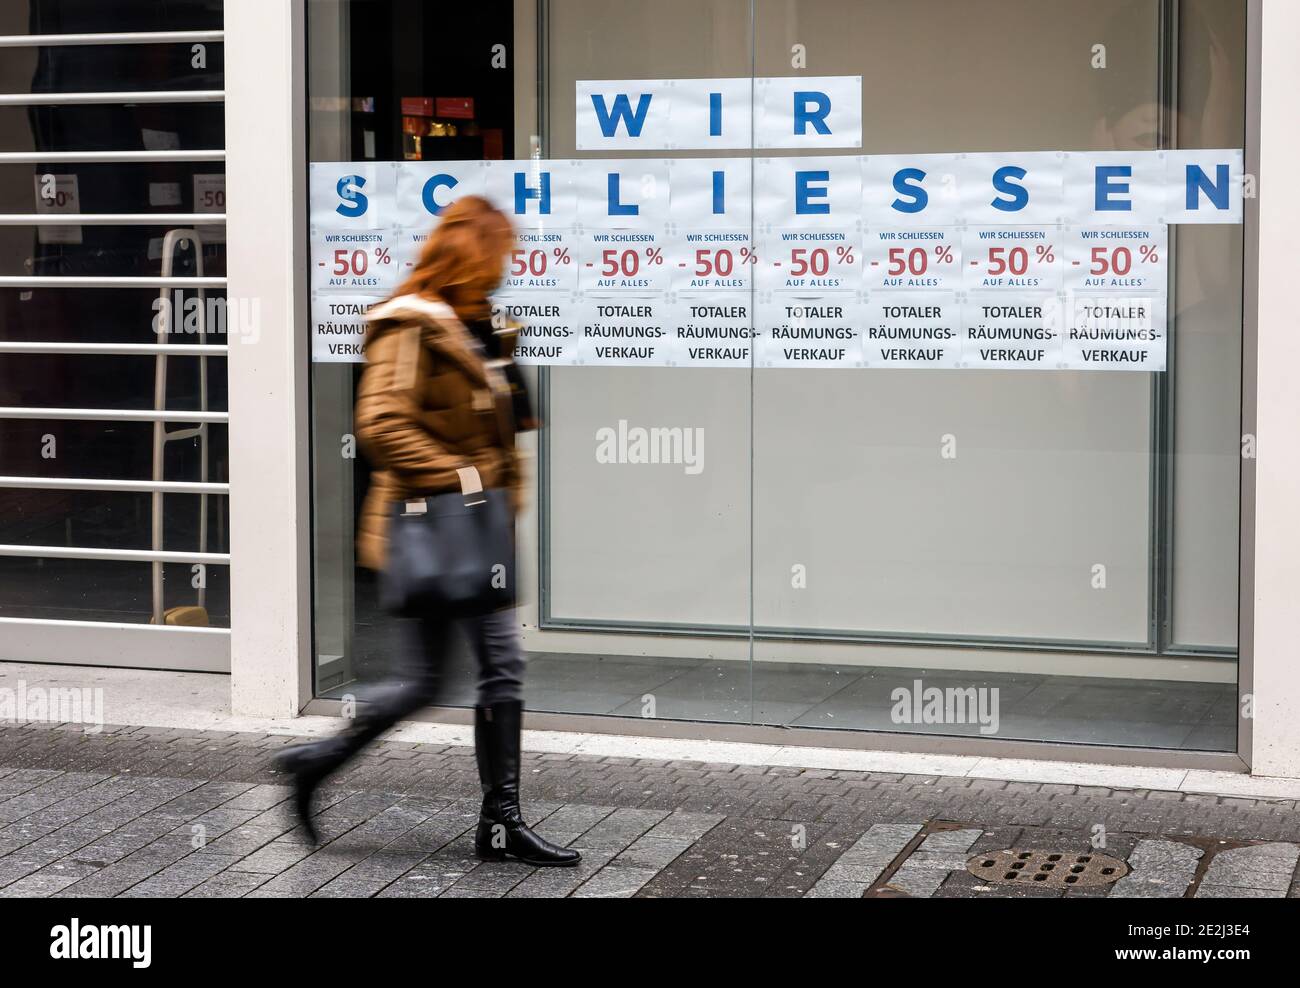 https://c8.alamy.com/comp/2E2J3E4/cologne-north-rhine-westphalia-germany-cologne-city-center-in-times-of-corona-crisis-at-the-second-lockdown-clearance-sale-due-to-store-closure-2E2J3E4.jpg